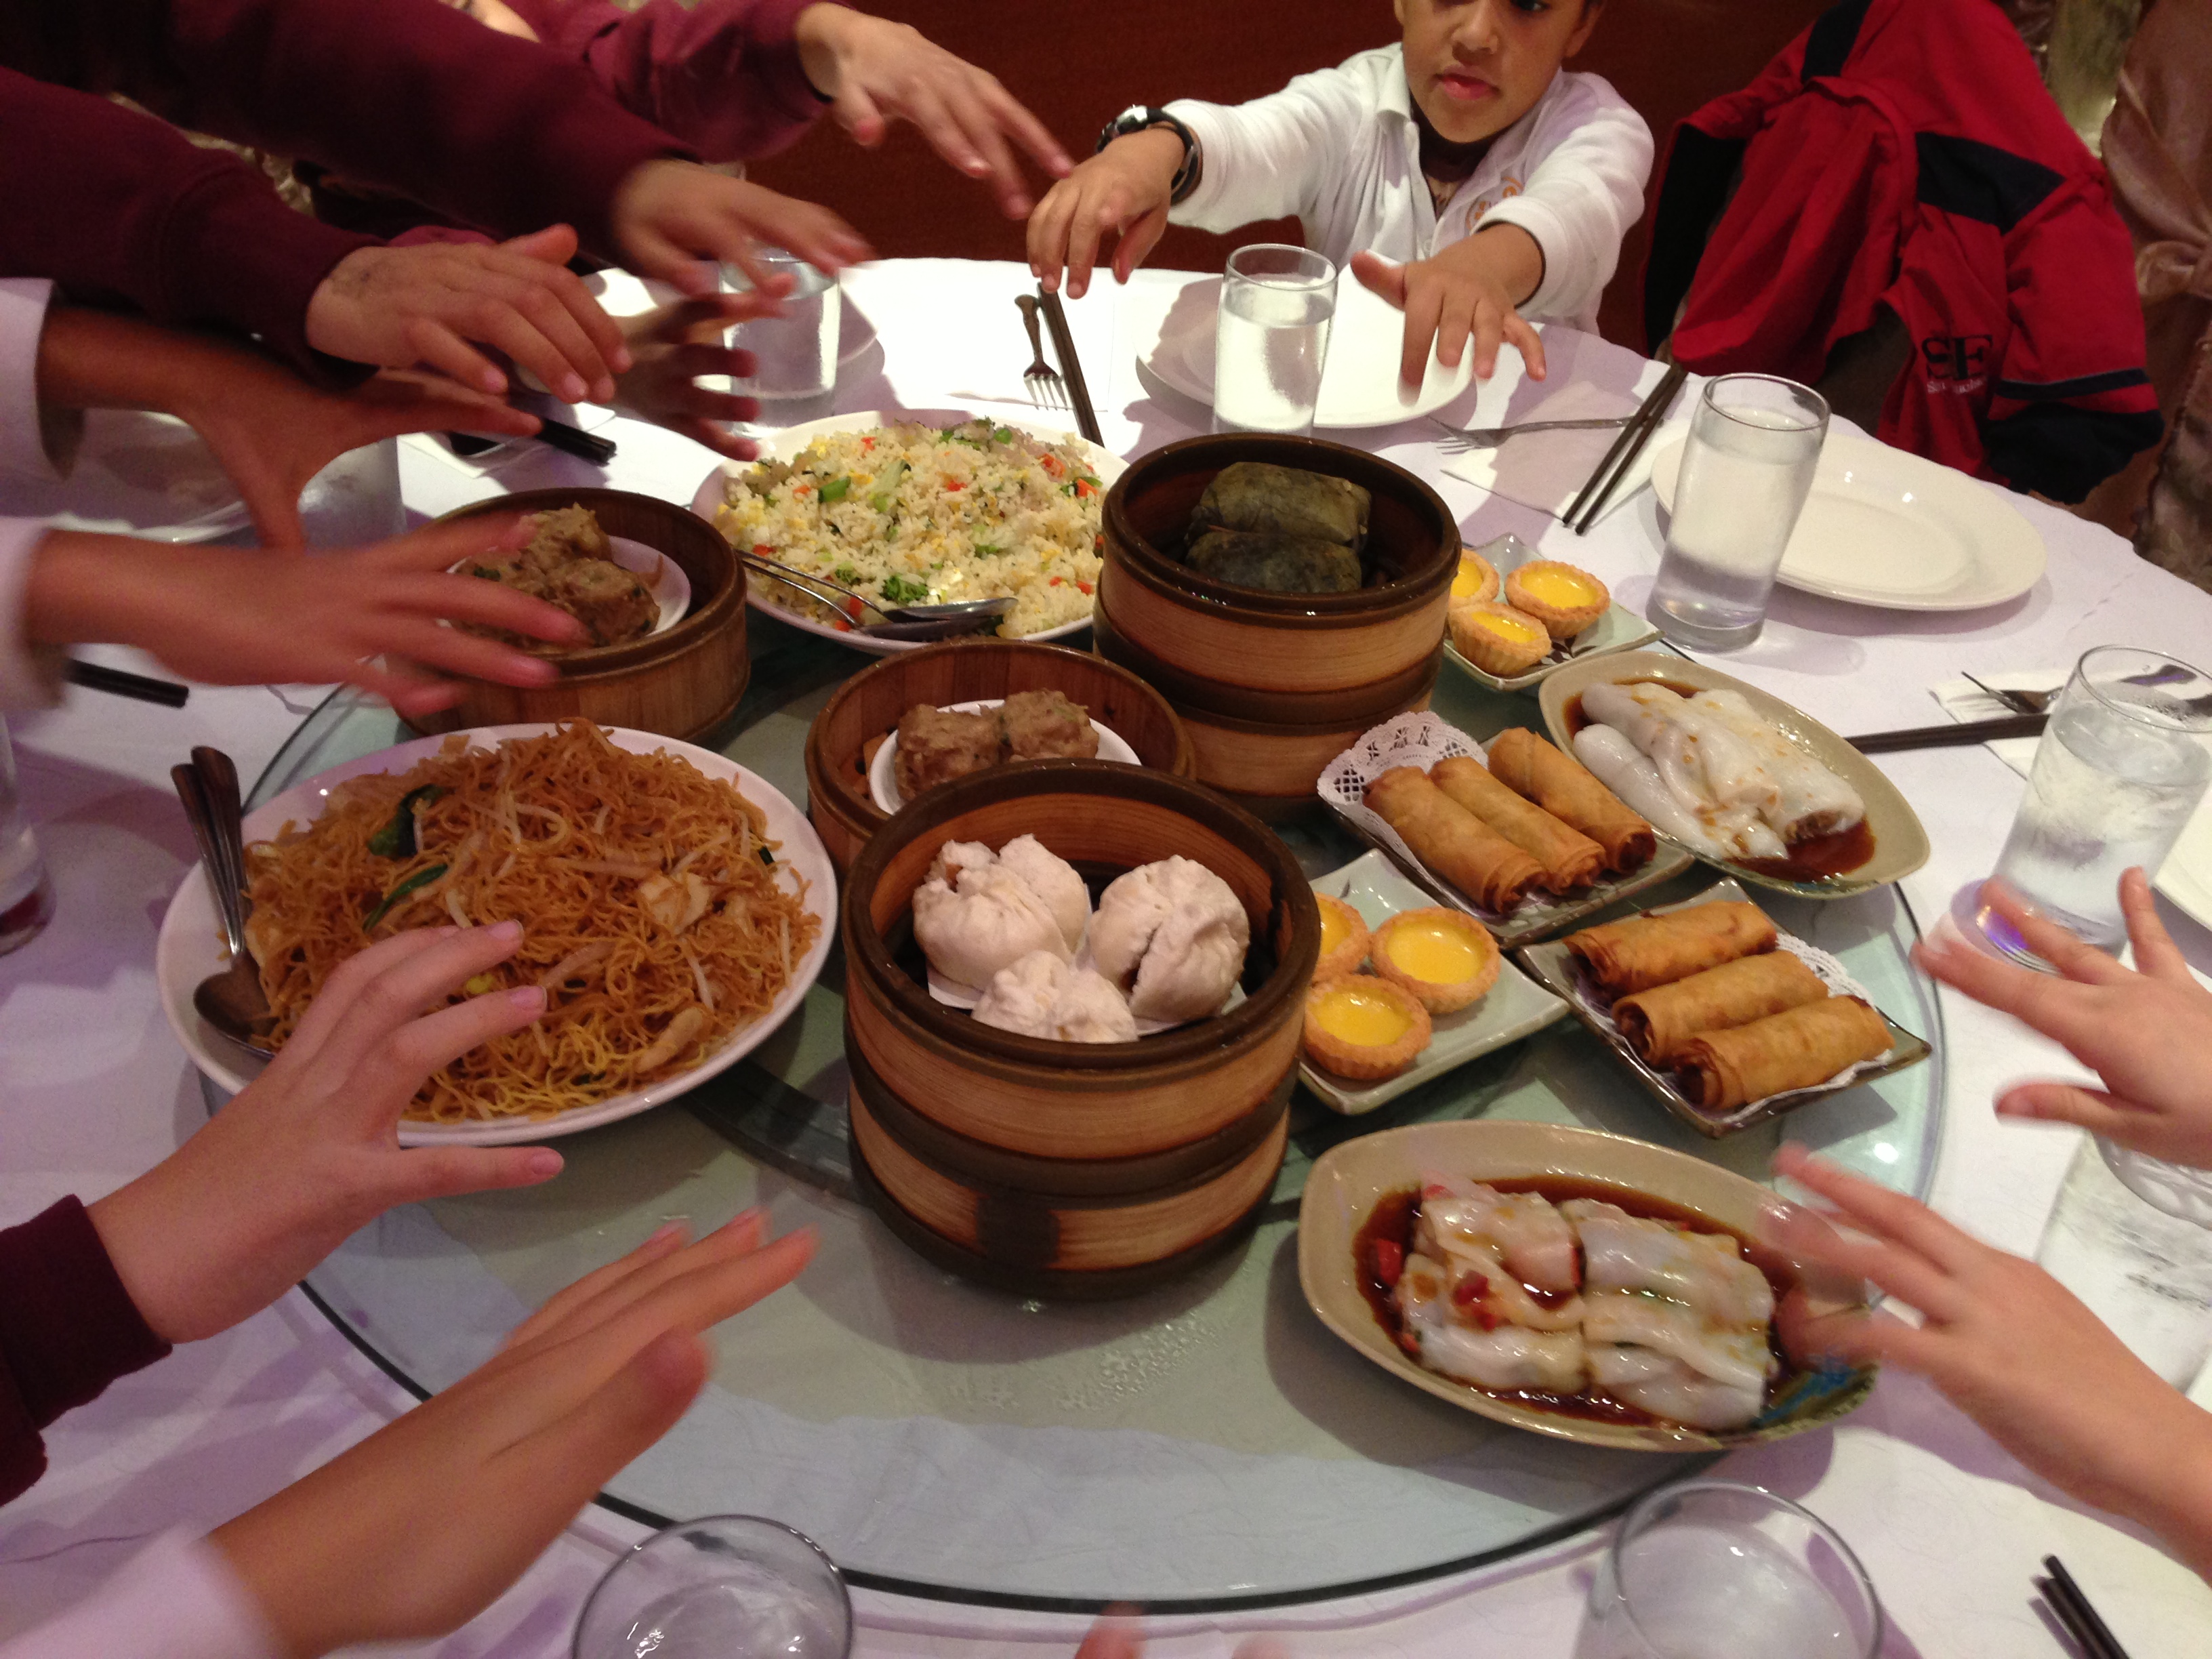 Tradition dish. Chinese Table food. Table manners. Chinese Table manners. Table manners in China.